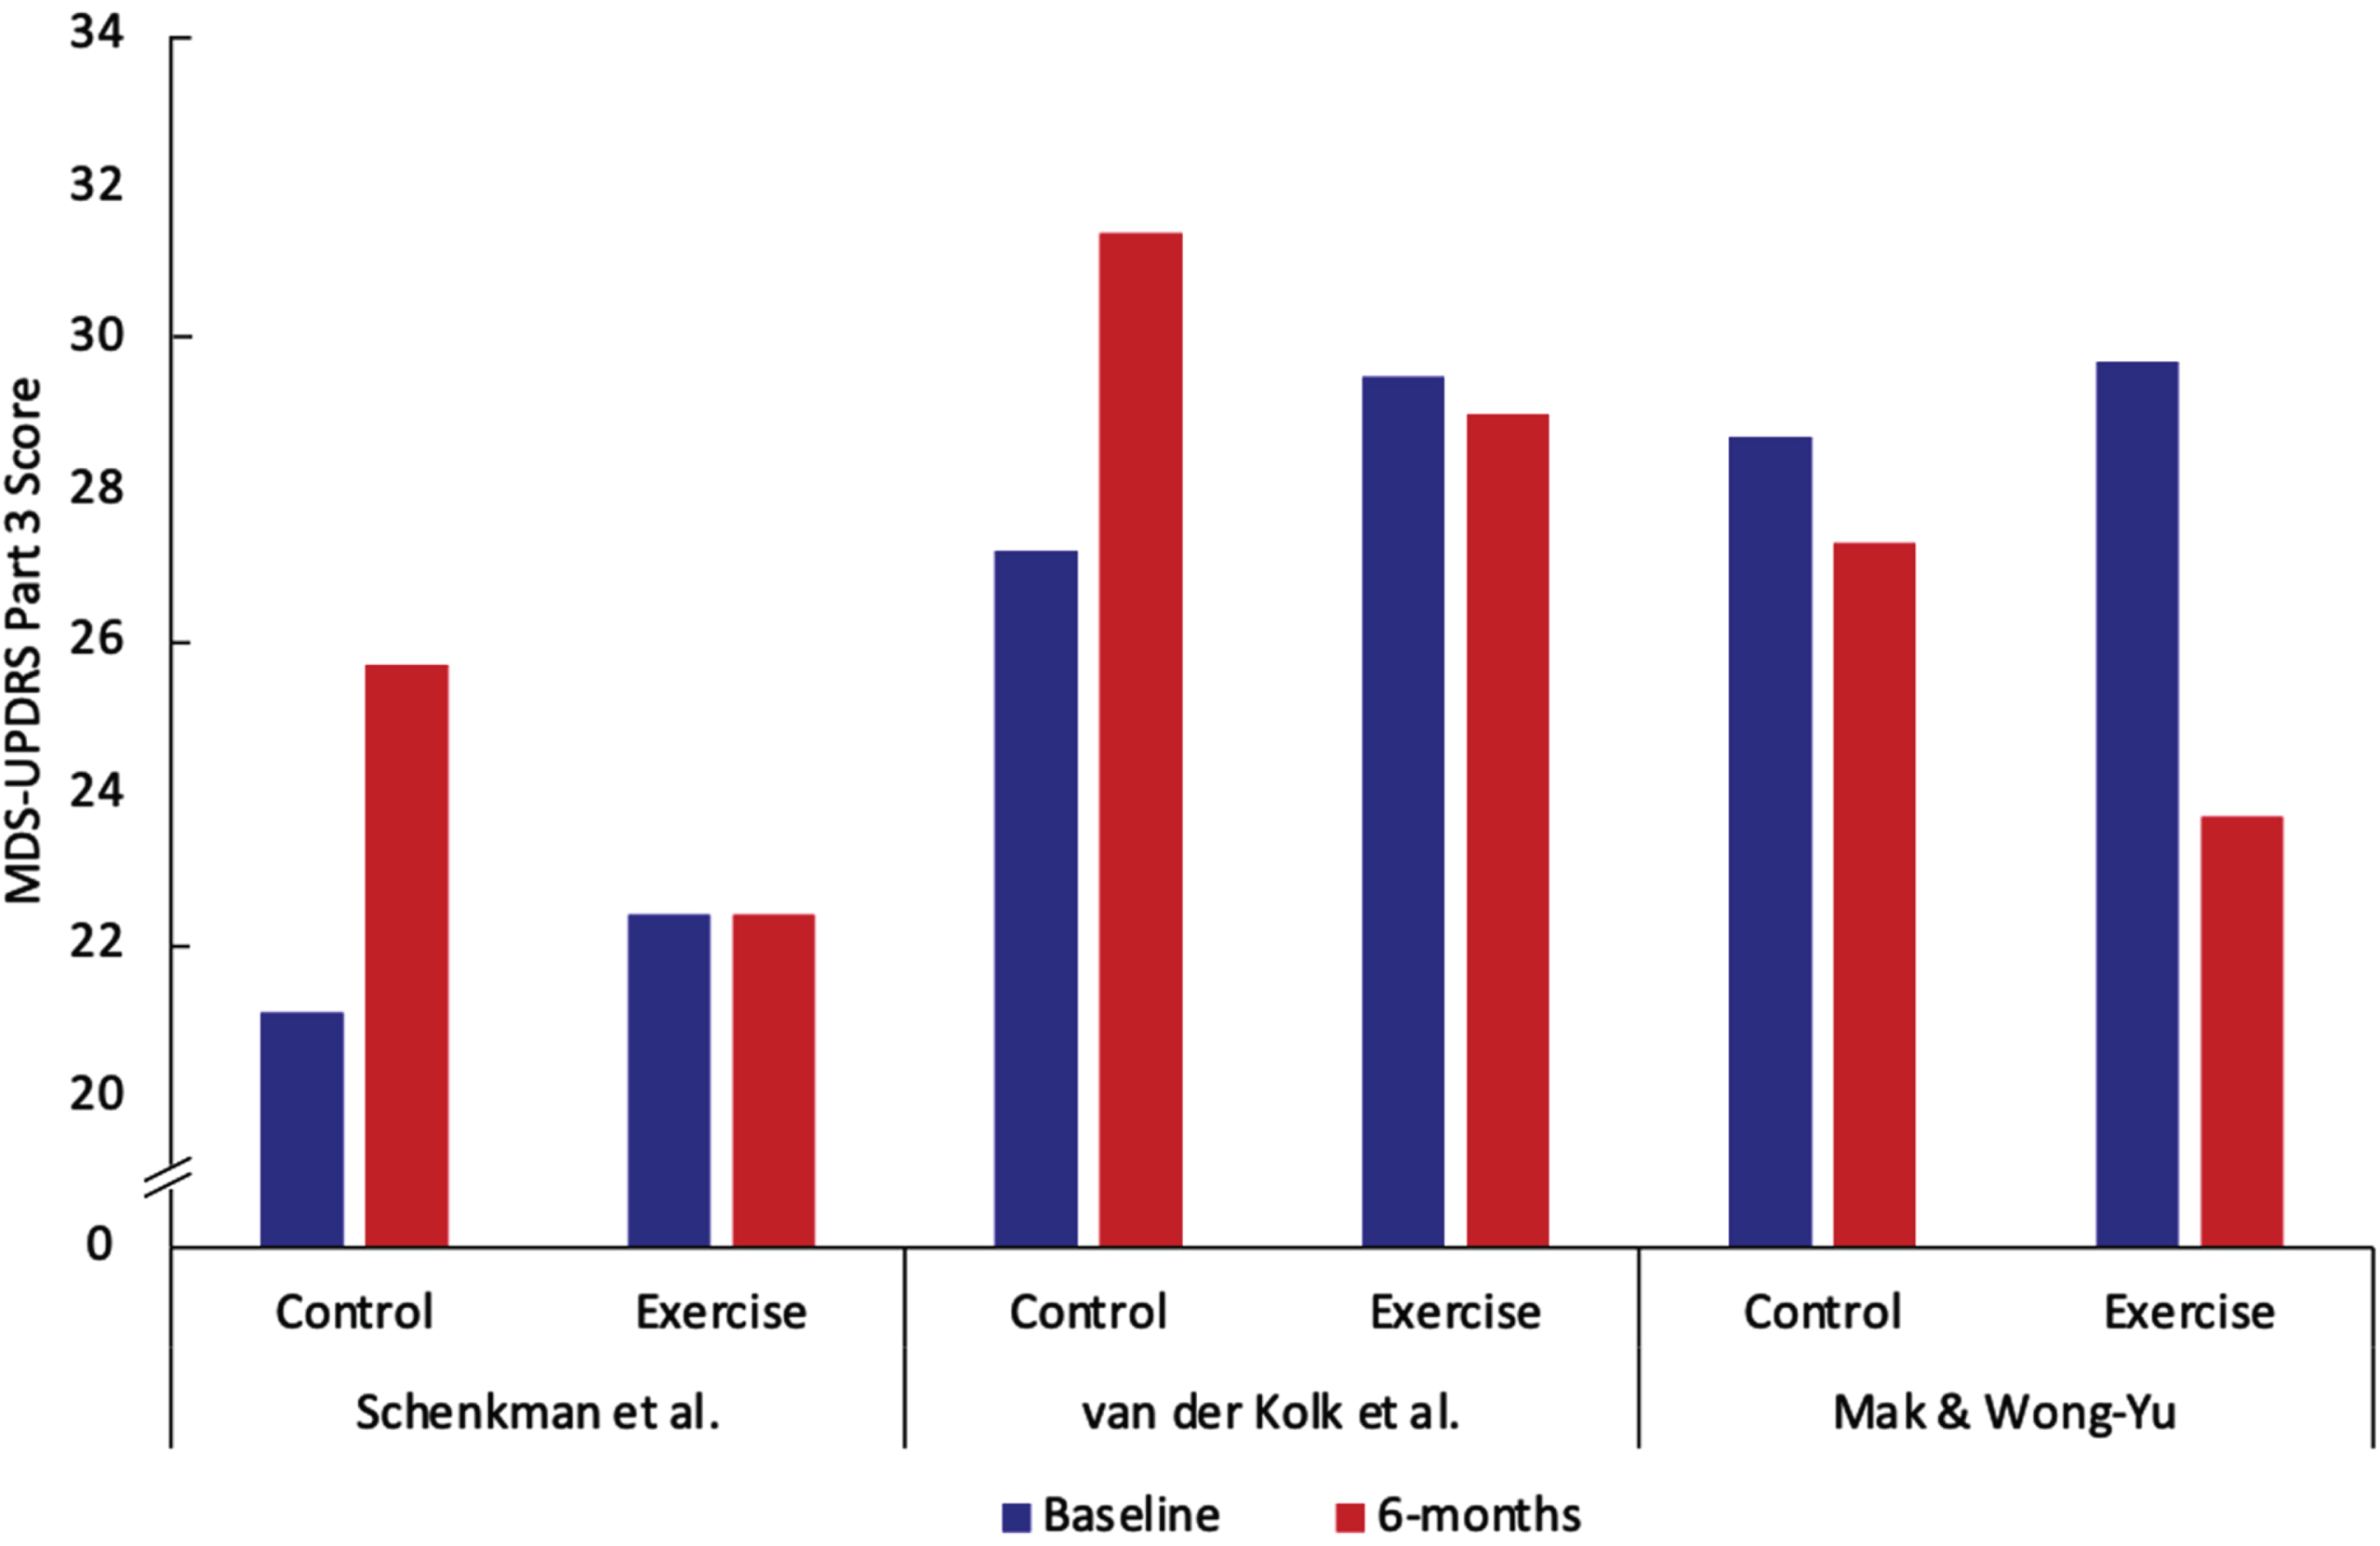 Control and exercise aerobic condition for clinical trials conducted by Schenkman et al. [5], van der Kolk et al. [6] (tested off medication), and Mak et al. [7] tested on medication. Blue depicts baseline condition and red the 6-month condition.